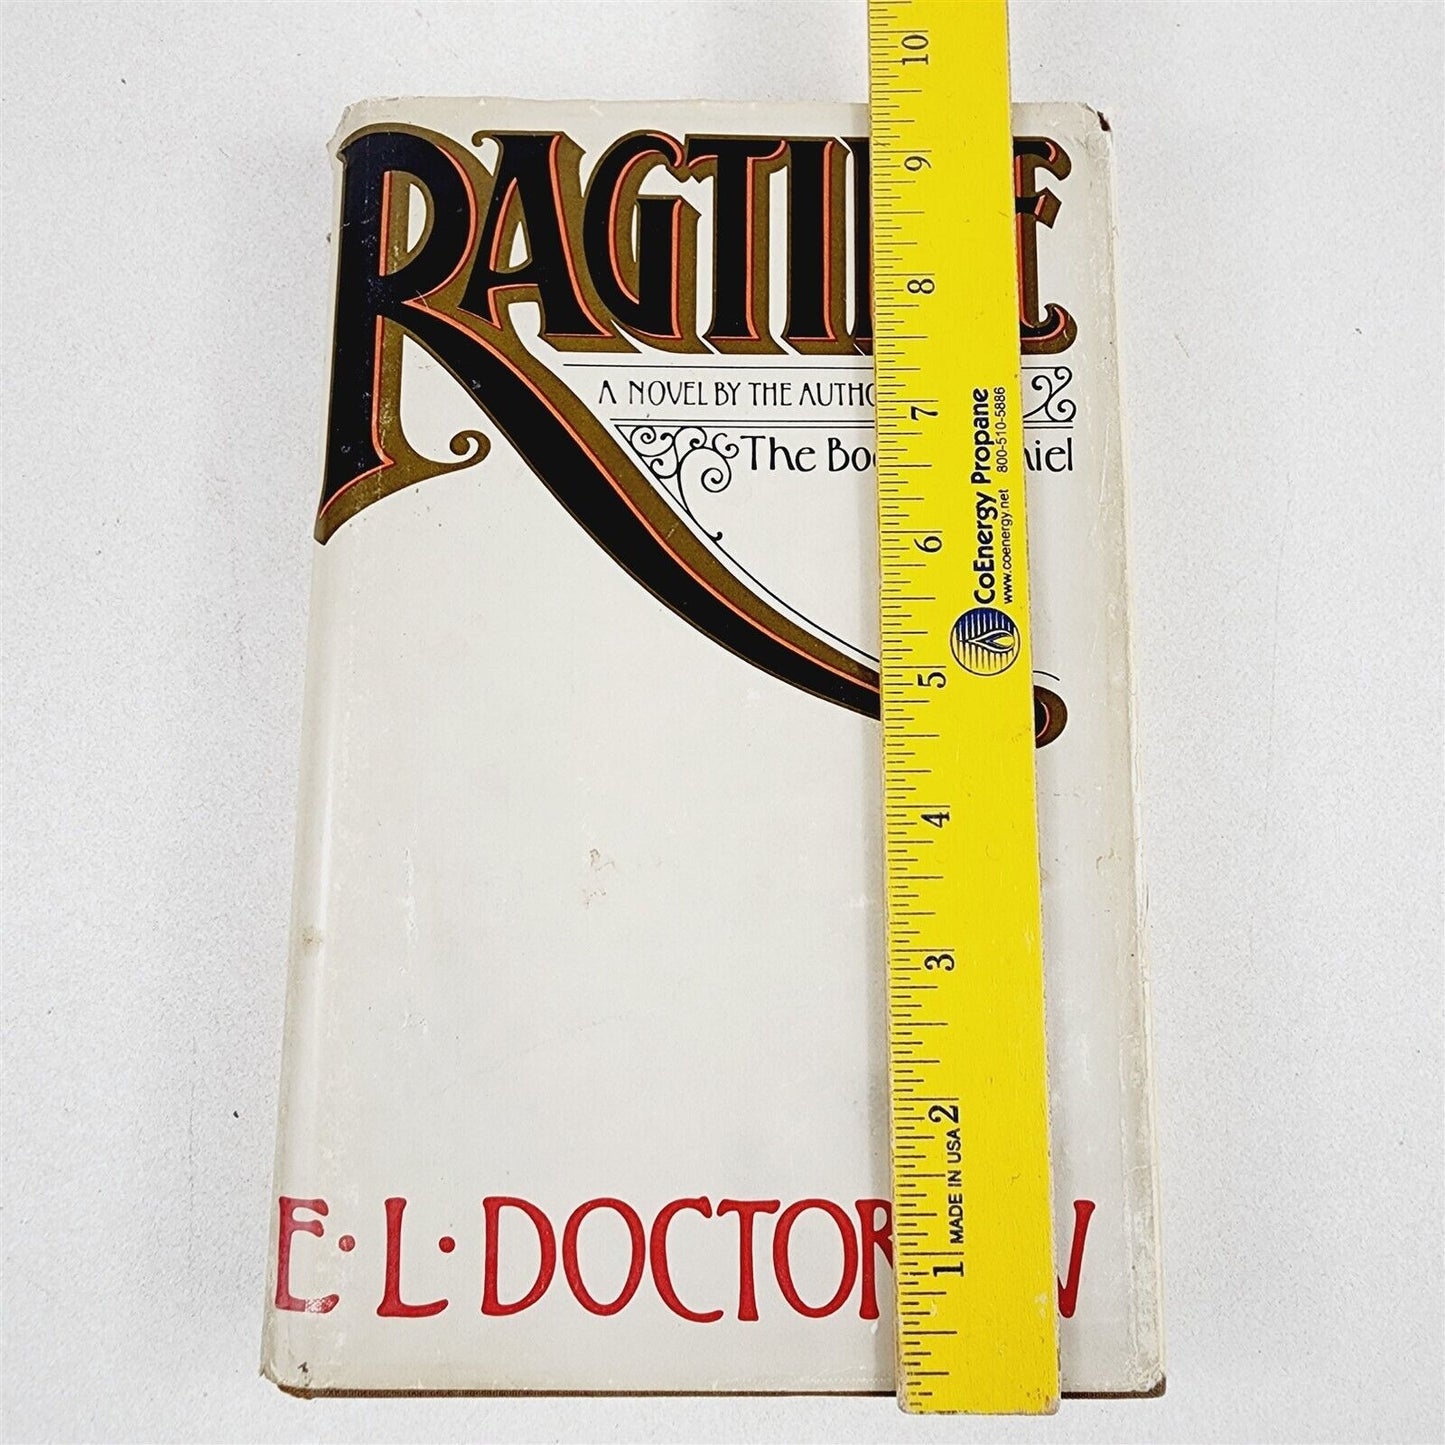 Ragtime by E.L. Doctorow Hardcover First Edition 1975